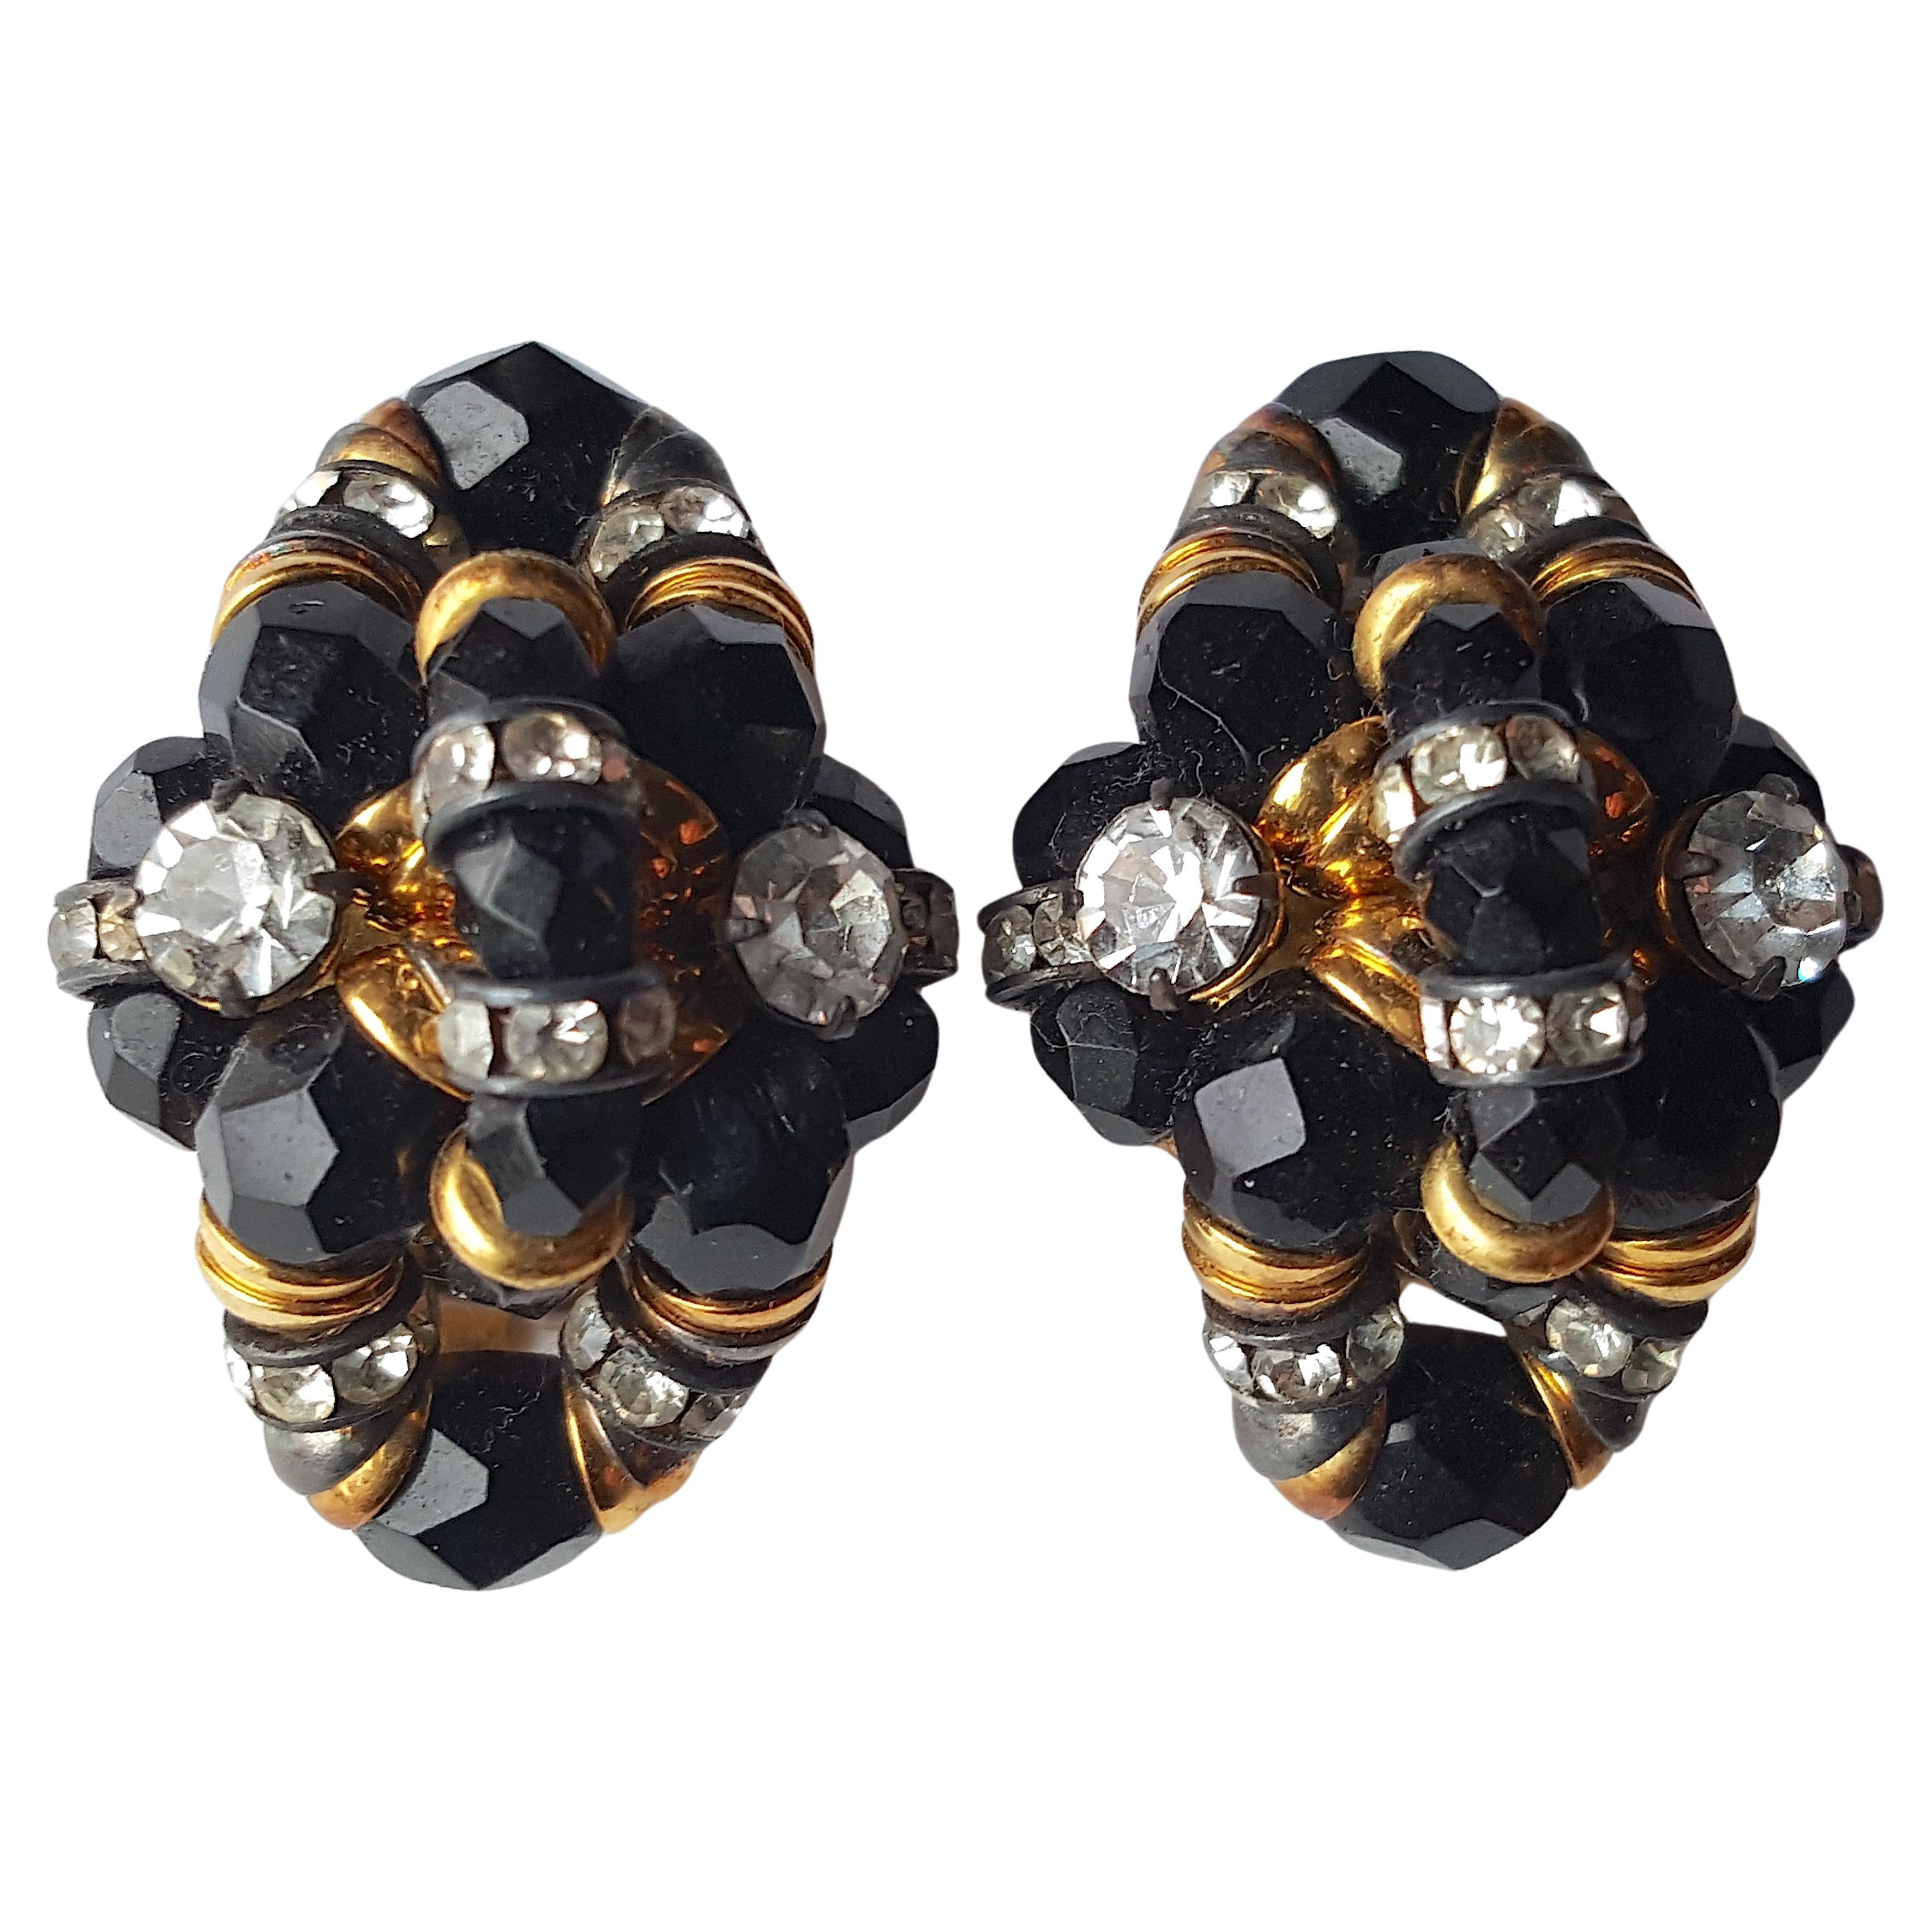 Artisan Couture Montague 1950s French WiredGlassBeads CrystalEnameledRondelles Earrings For Sale